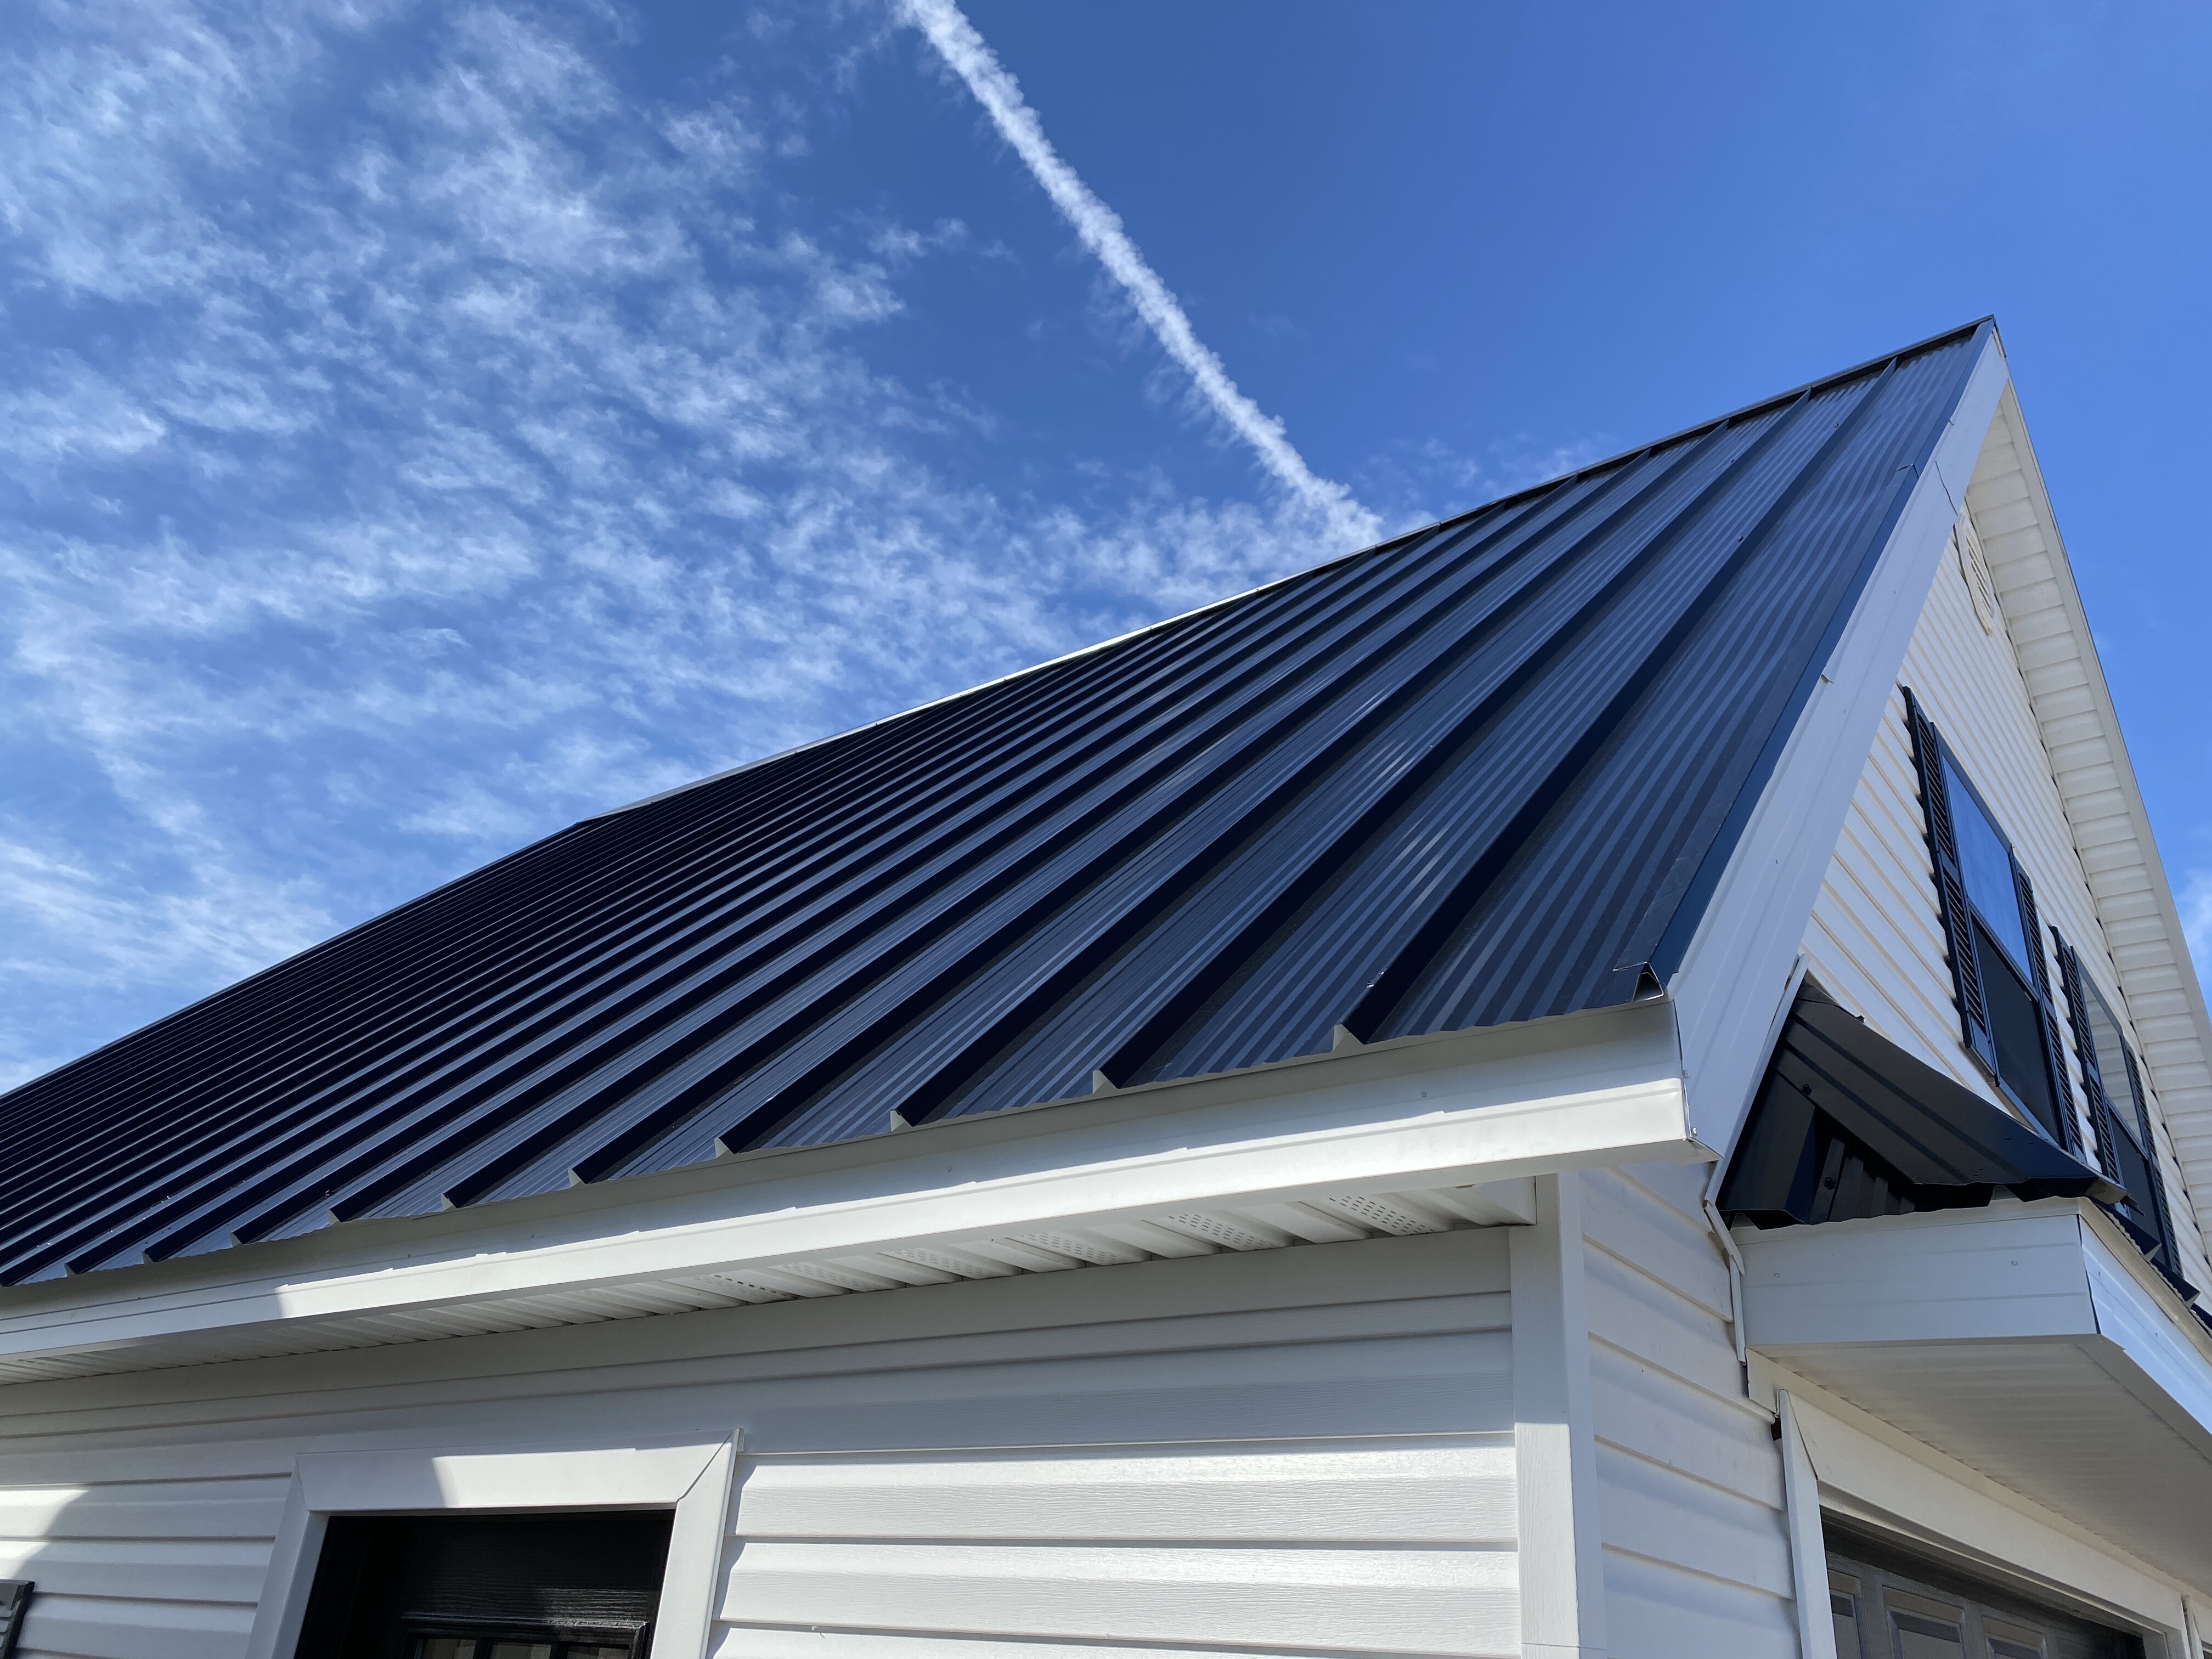 two car garage with metal roofing